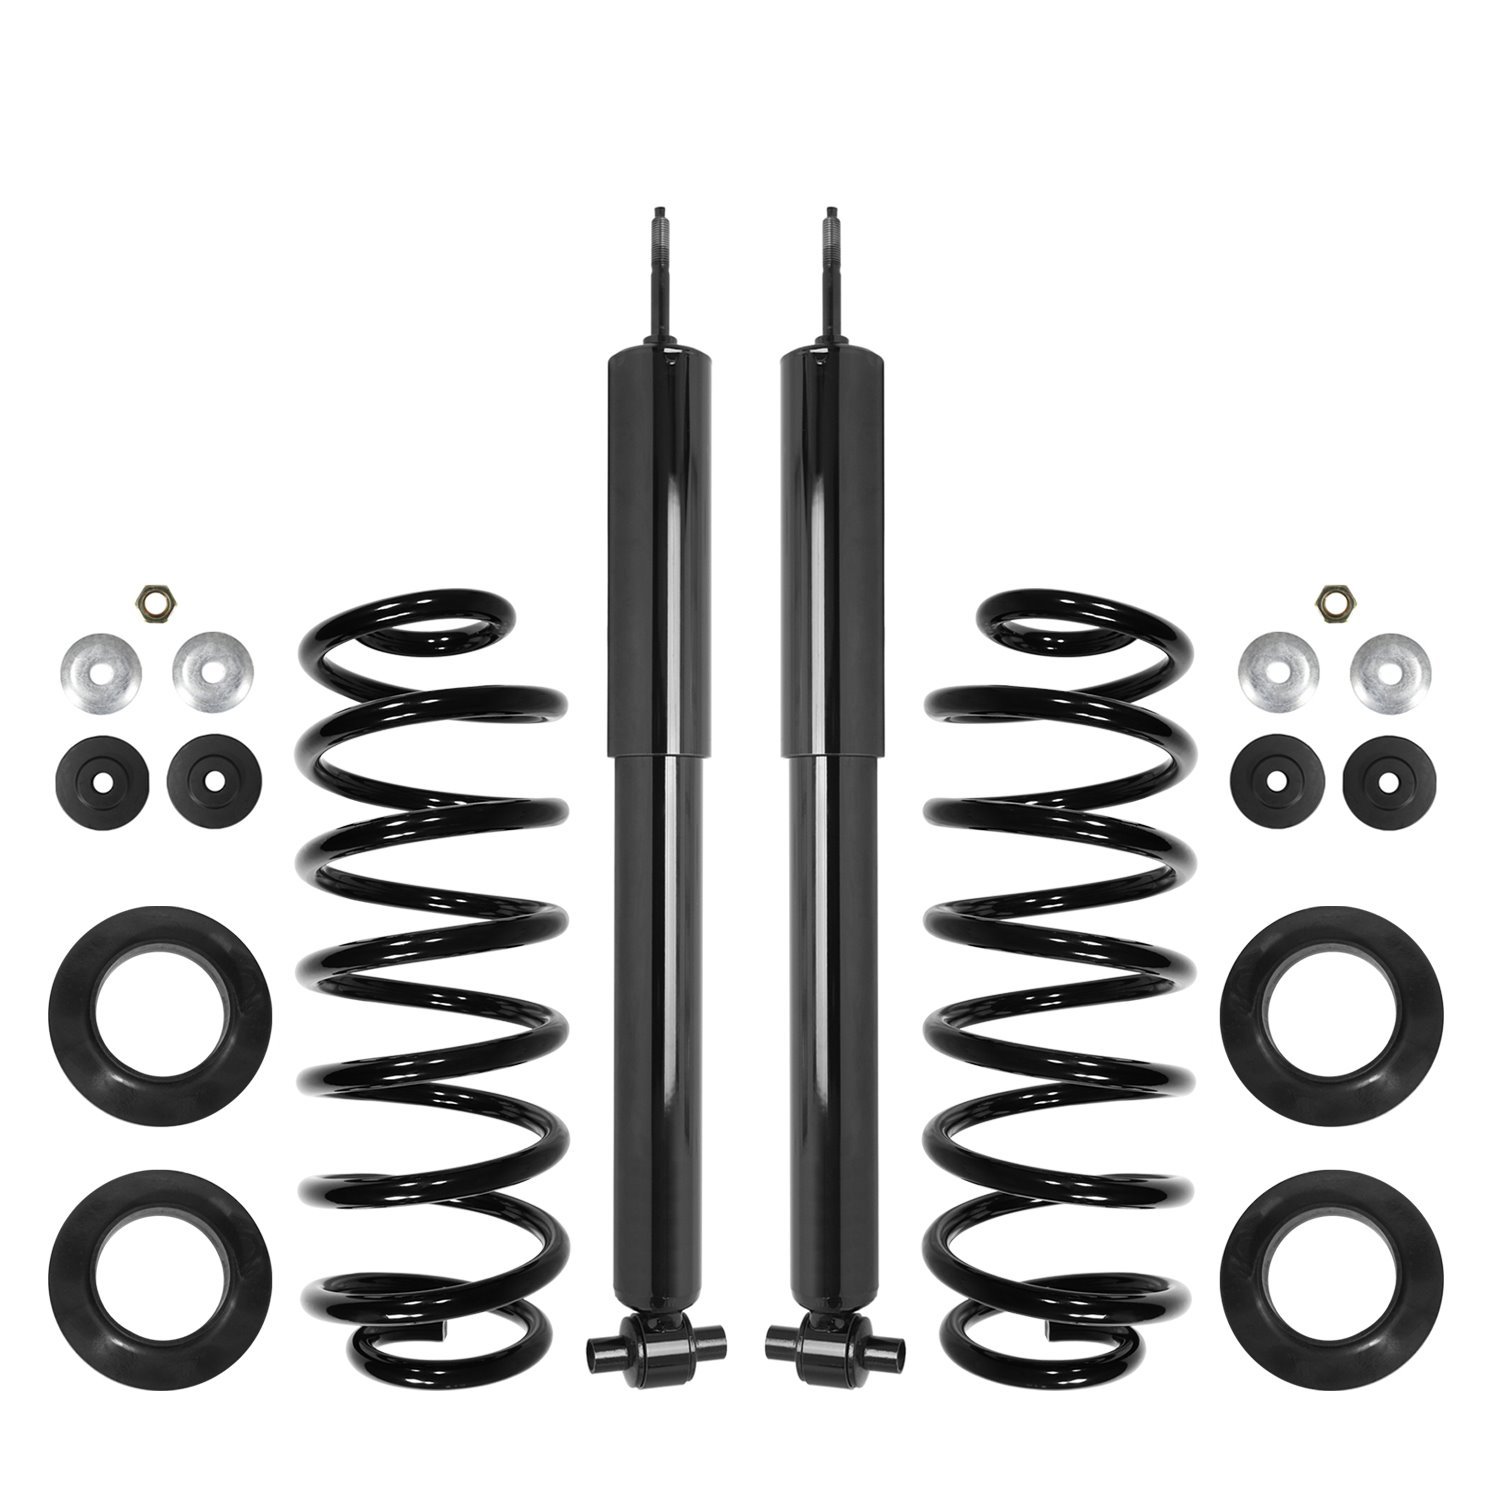 2-30-540000 Air Spring To Coil Spring Conversion Kit Fits Select Ford/Lincoln/Mercury